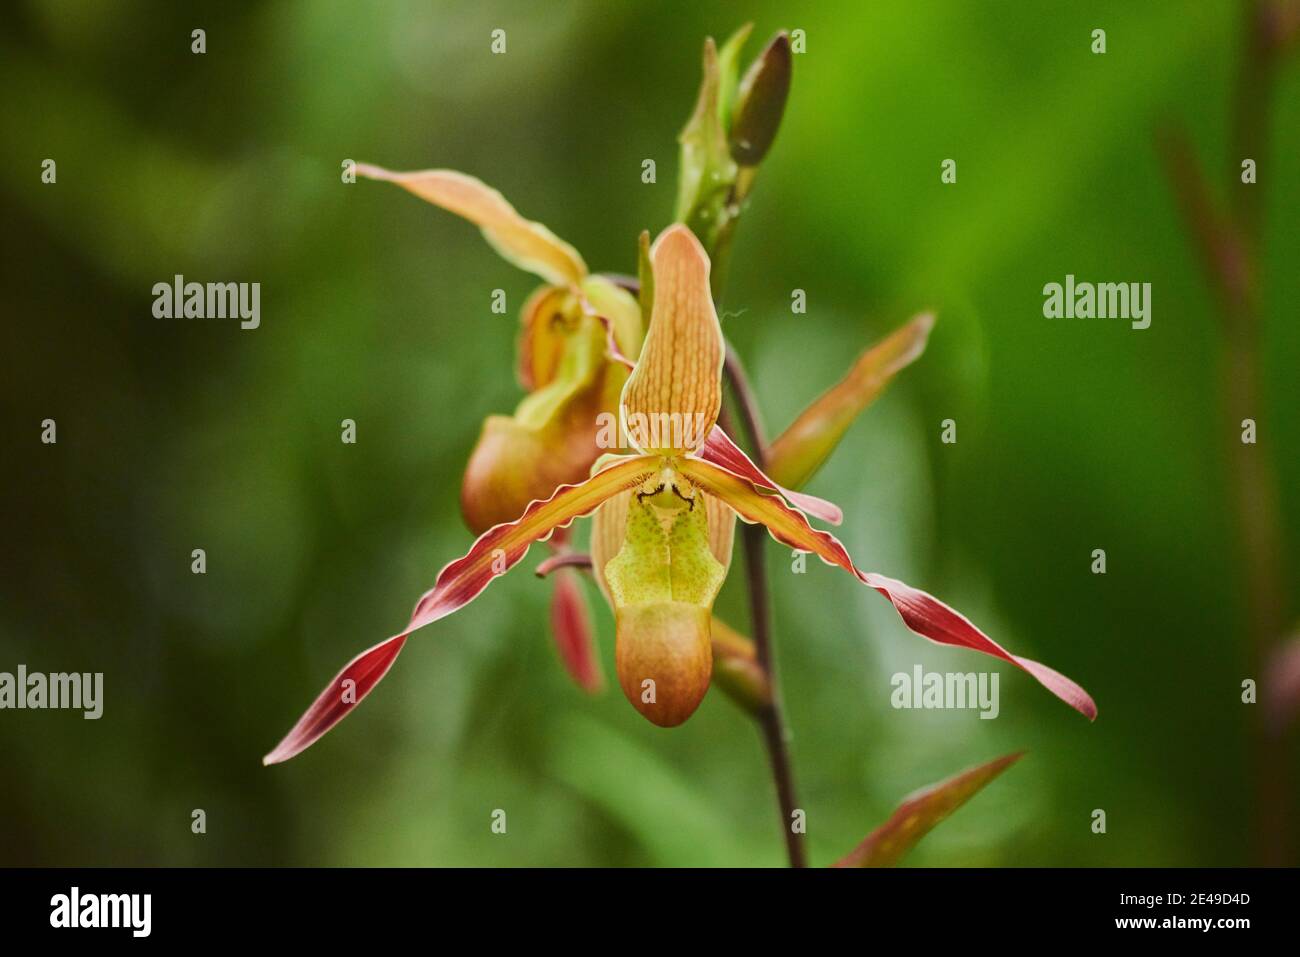 Orchid blossom, Paphiopedilum philippinense, blossom, blooming, Germany Stock Photo